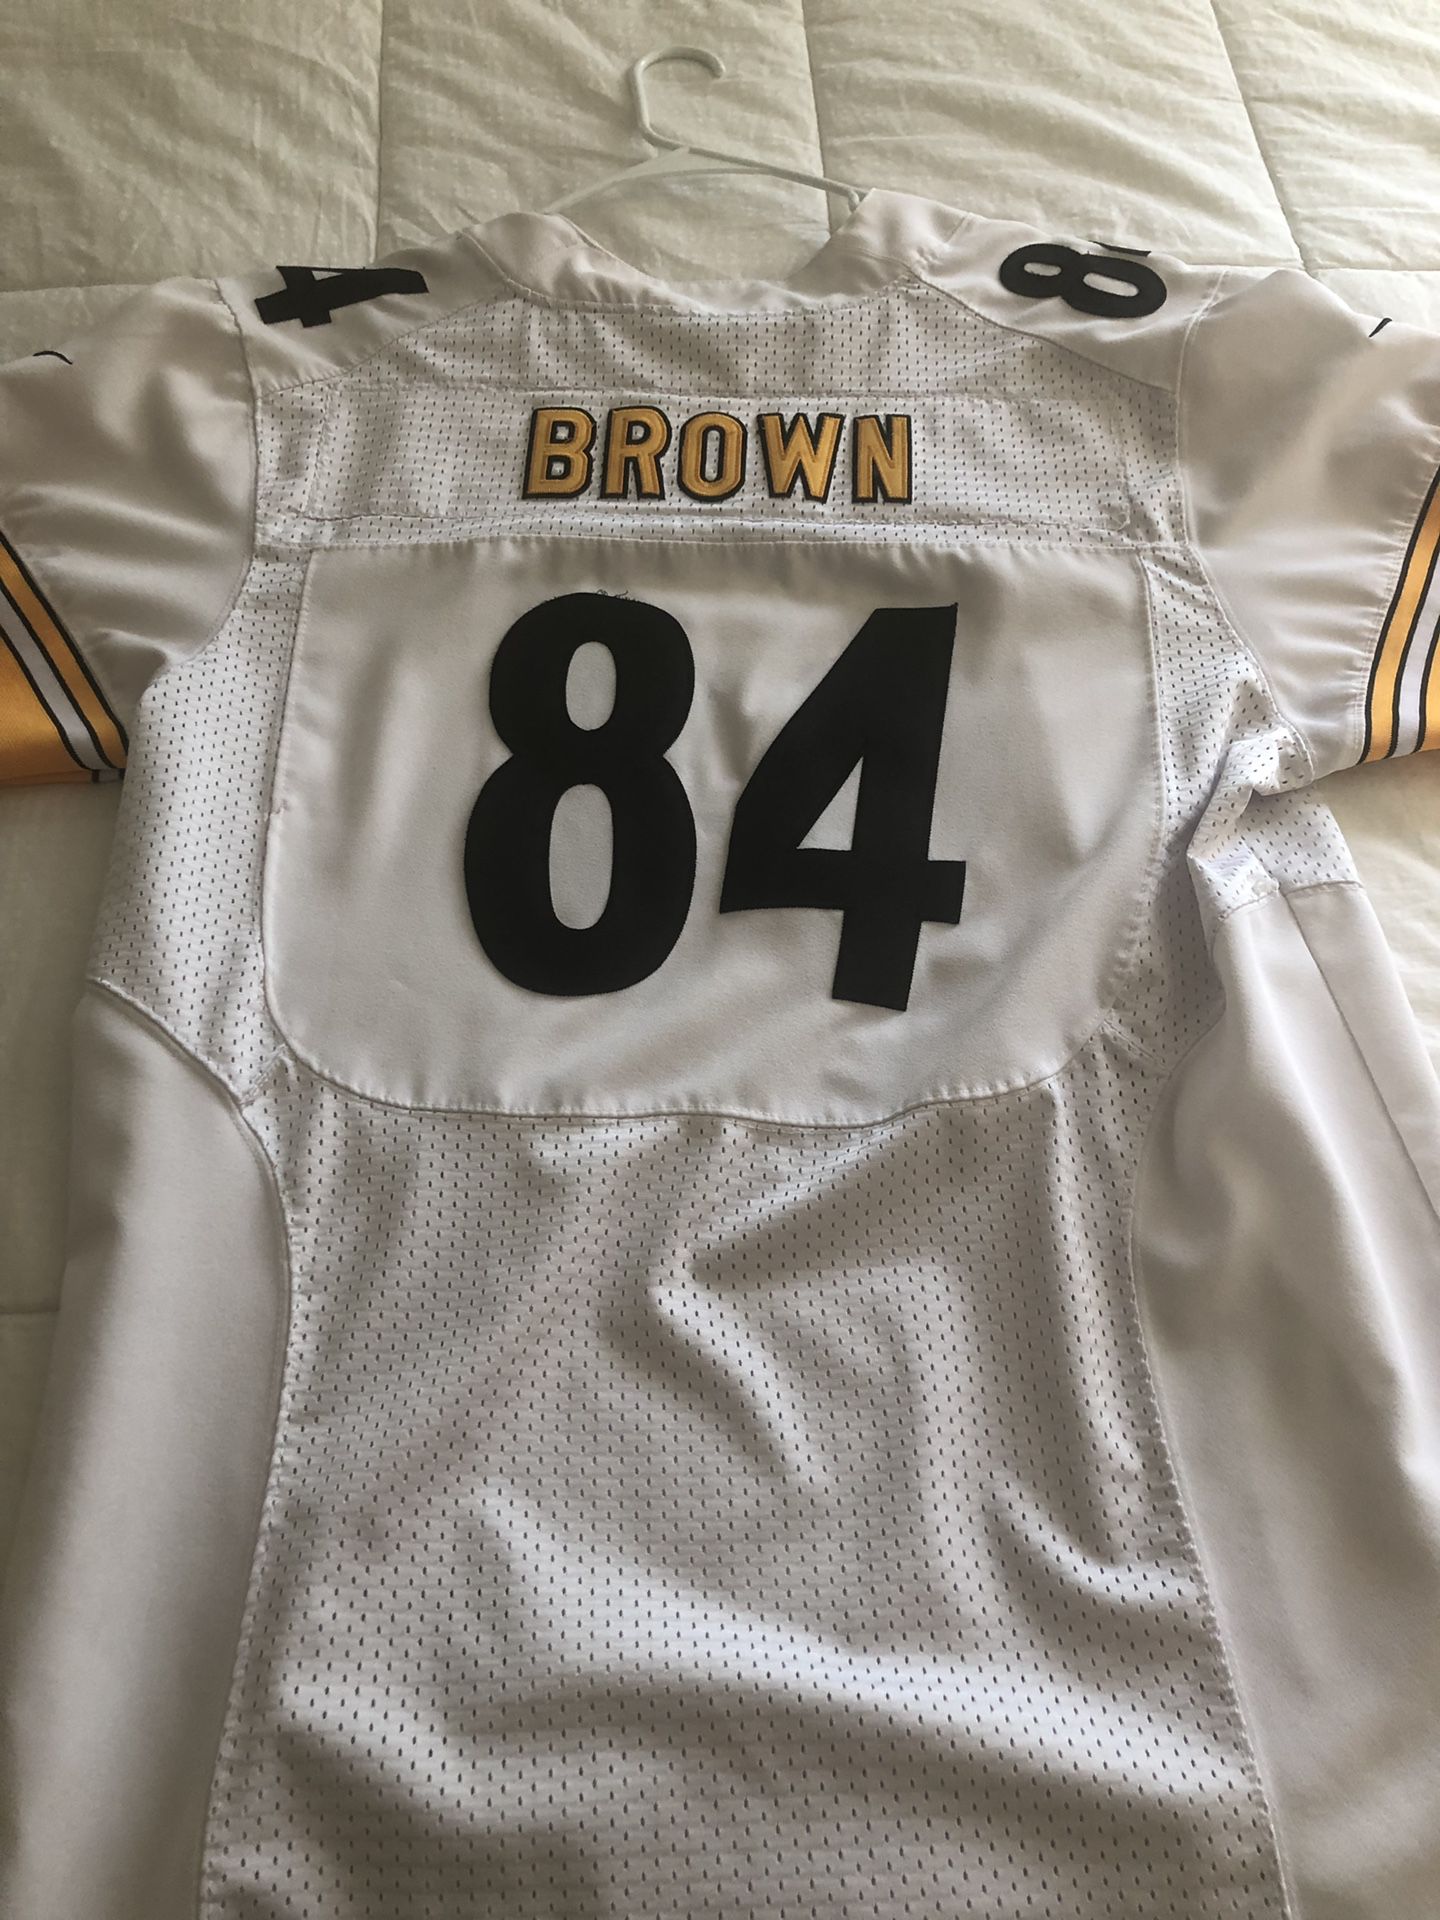 Authentic Pittsburgh Steelers Bumble Bee Throwback Jersey Size XXL for Sale  in Las Vegas, NV - OfferUp